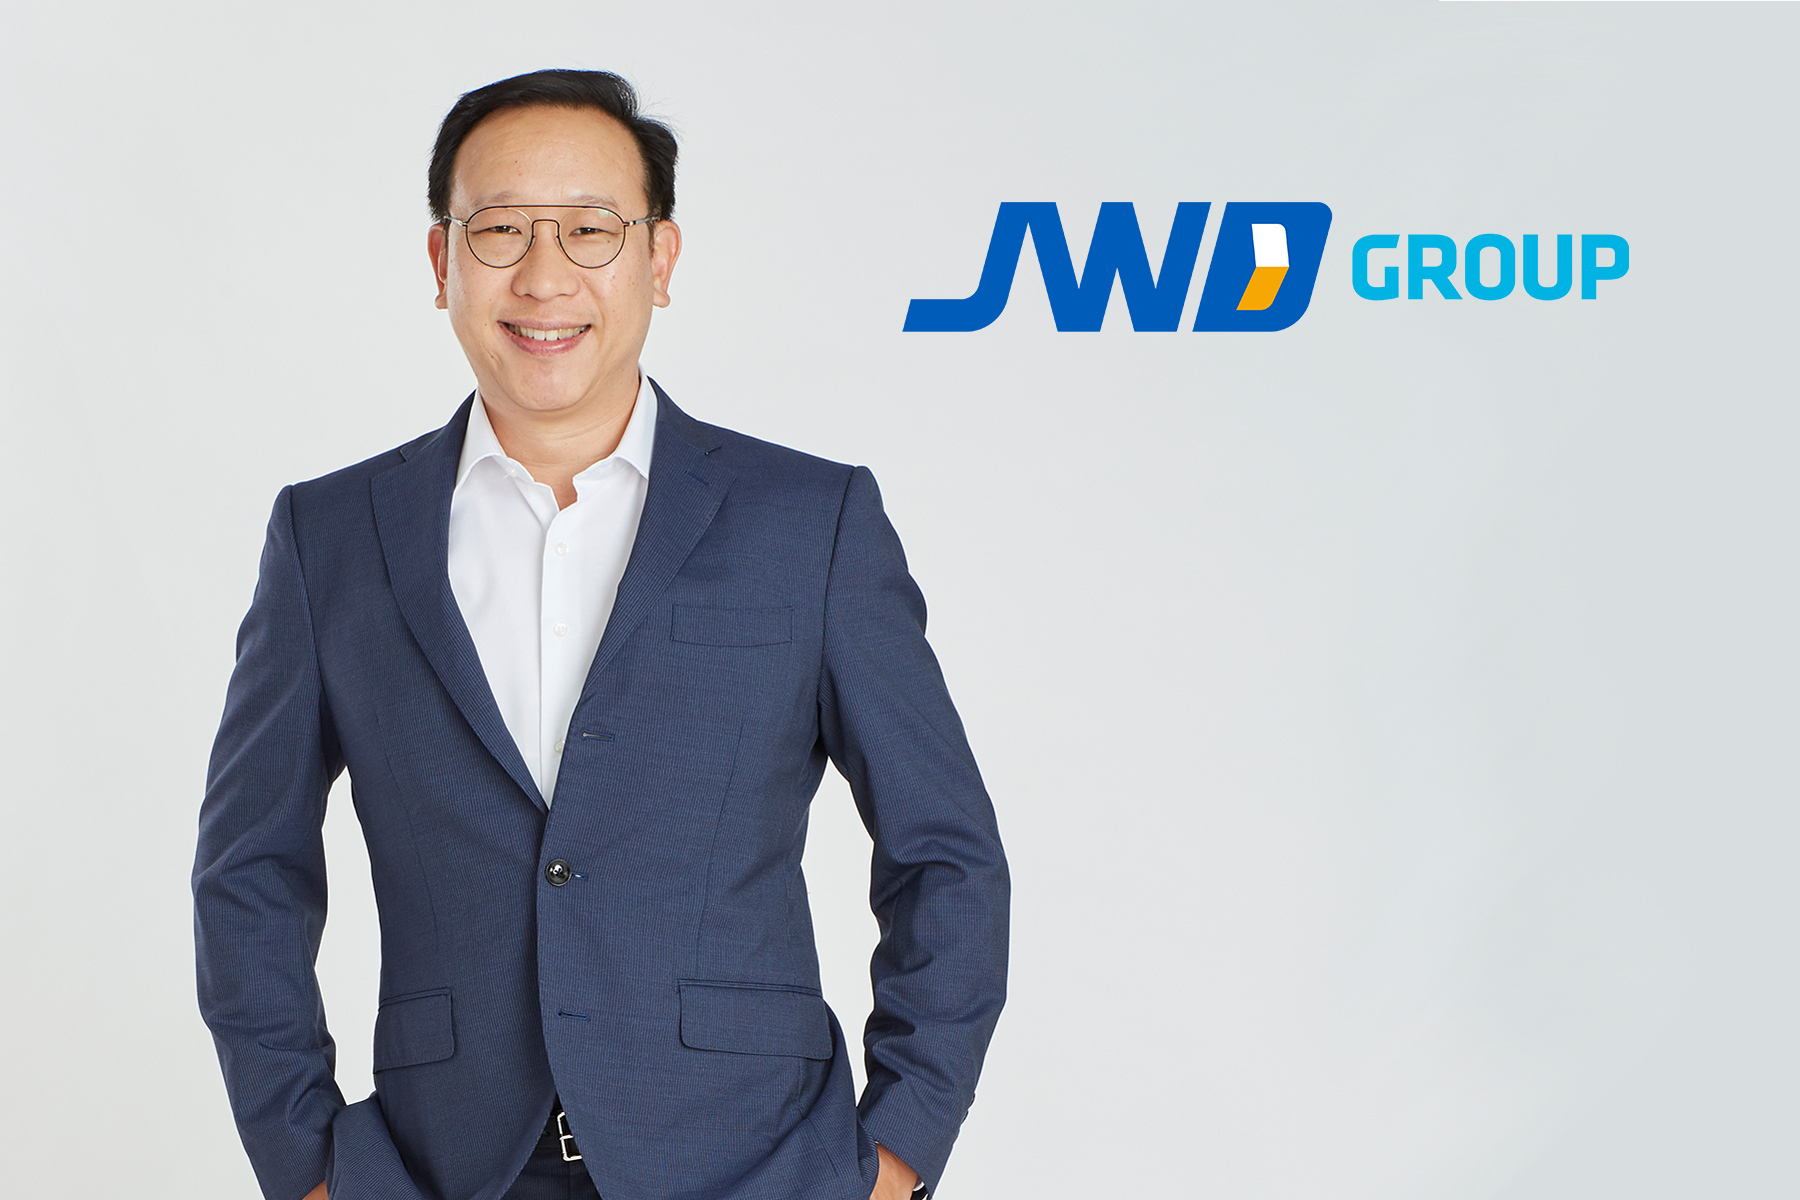 JWD confident of good Q1/2020 performance despite COVID-19 impact New solutions introduced for customers along with BCP for continuity